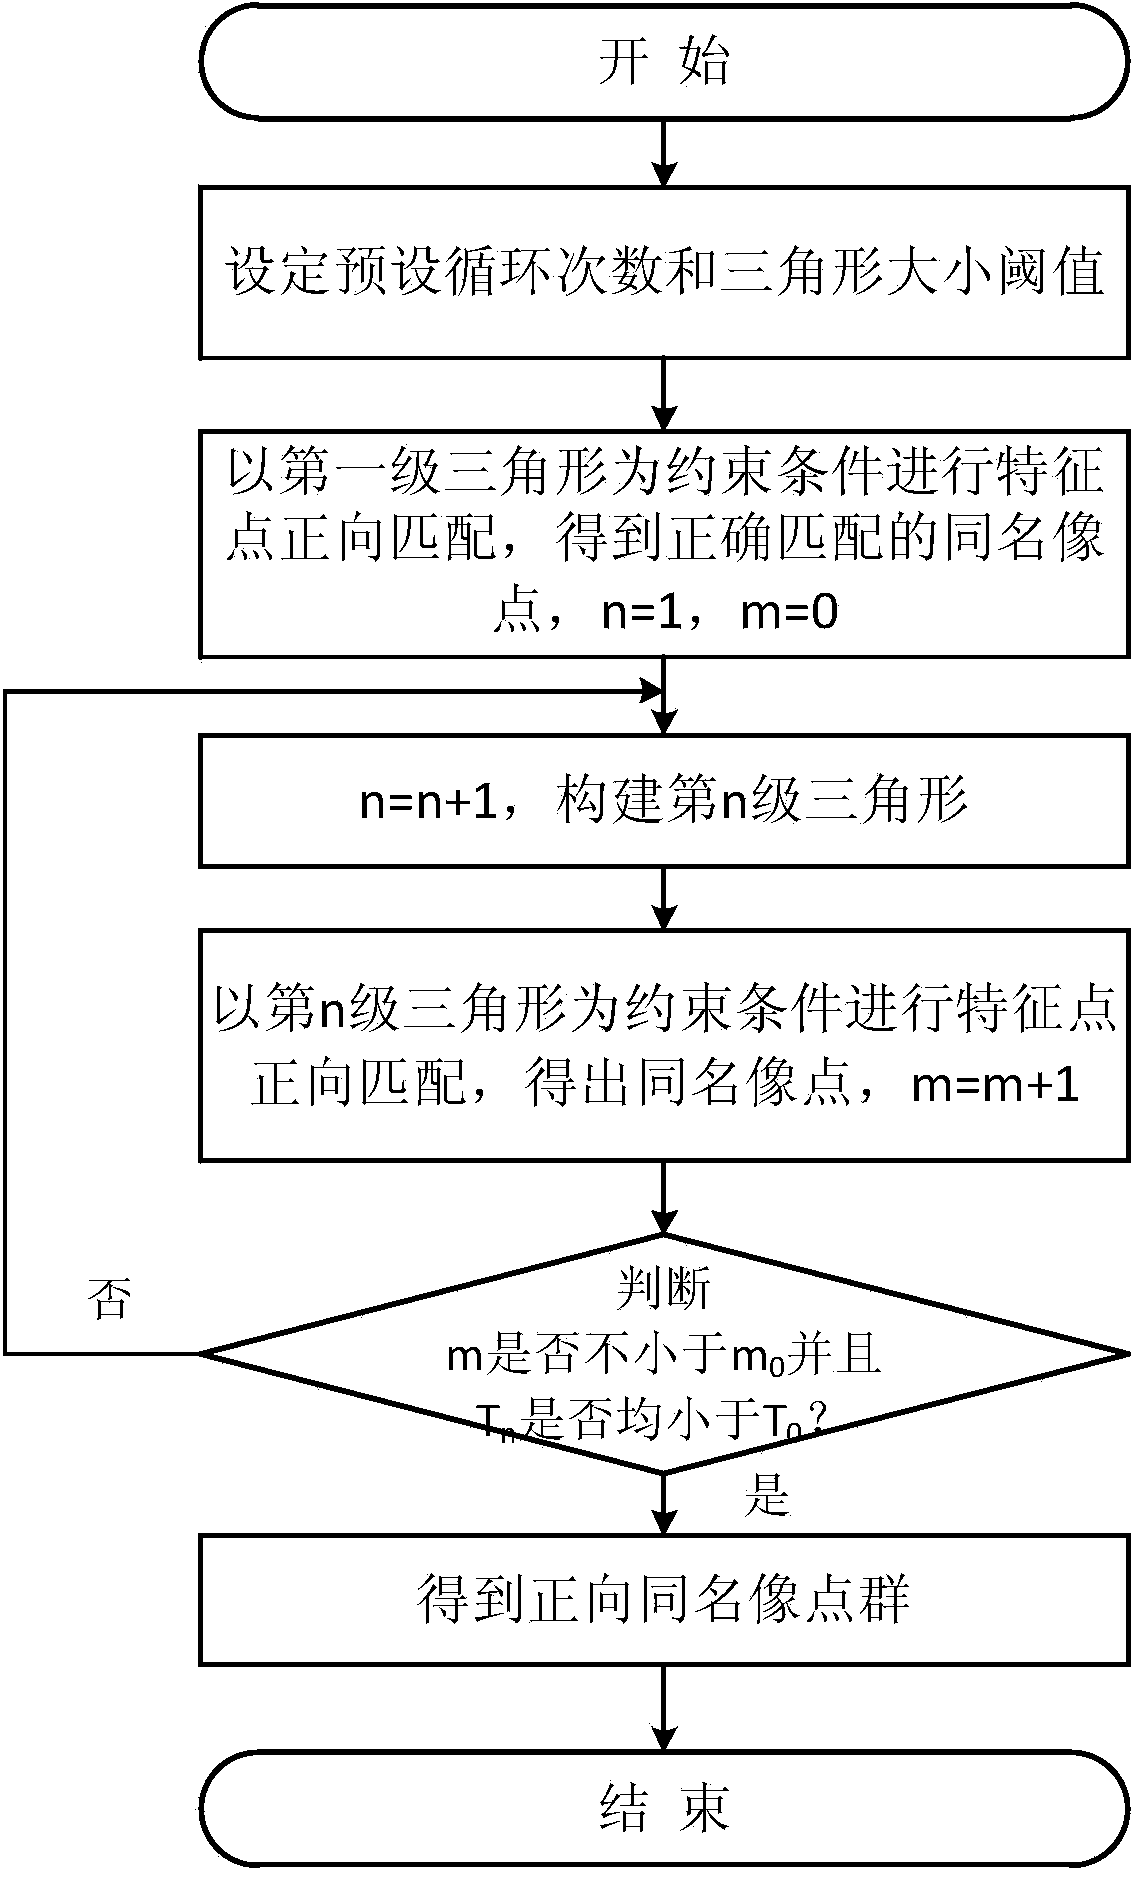 Feature point matching method for close-range shot stereoscopic image